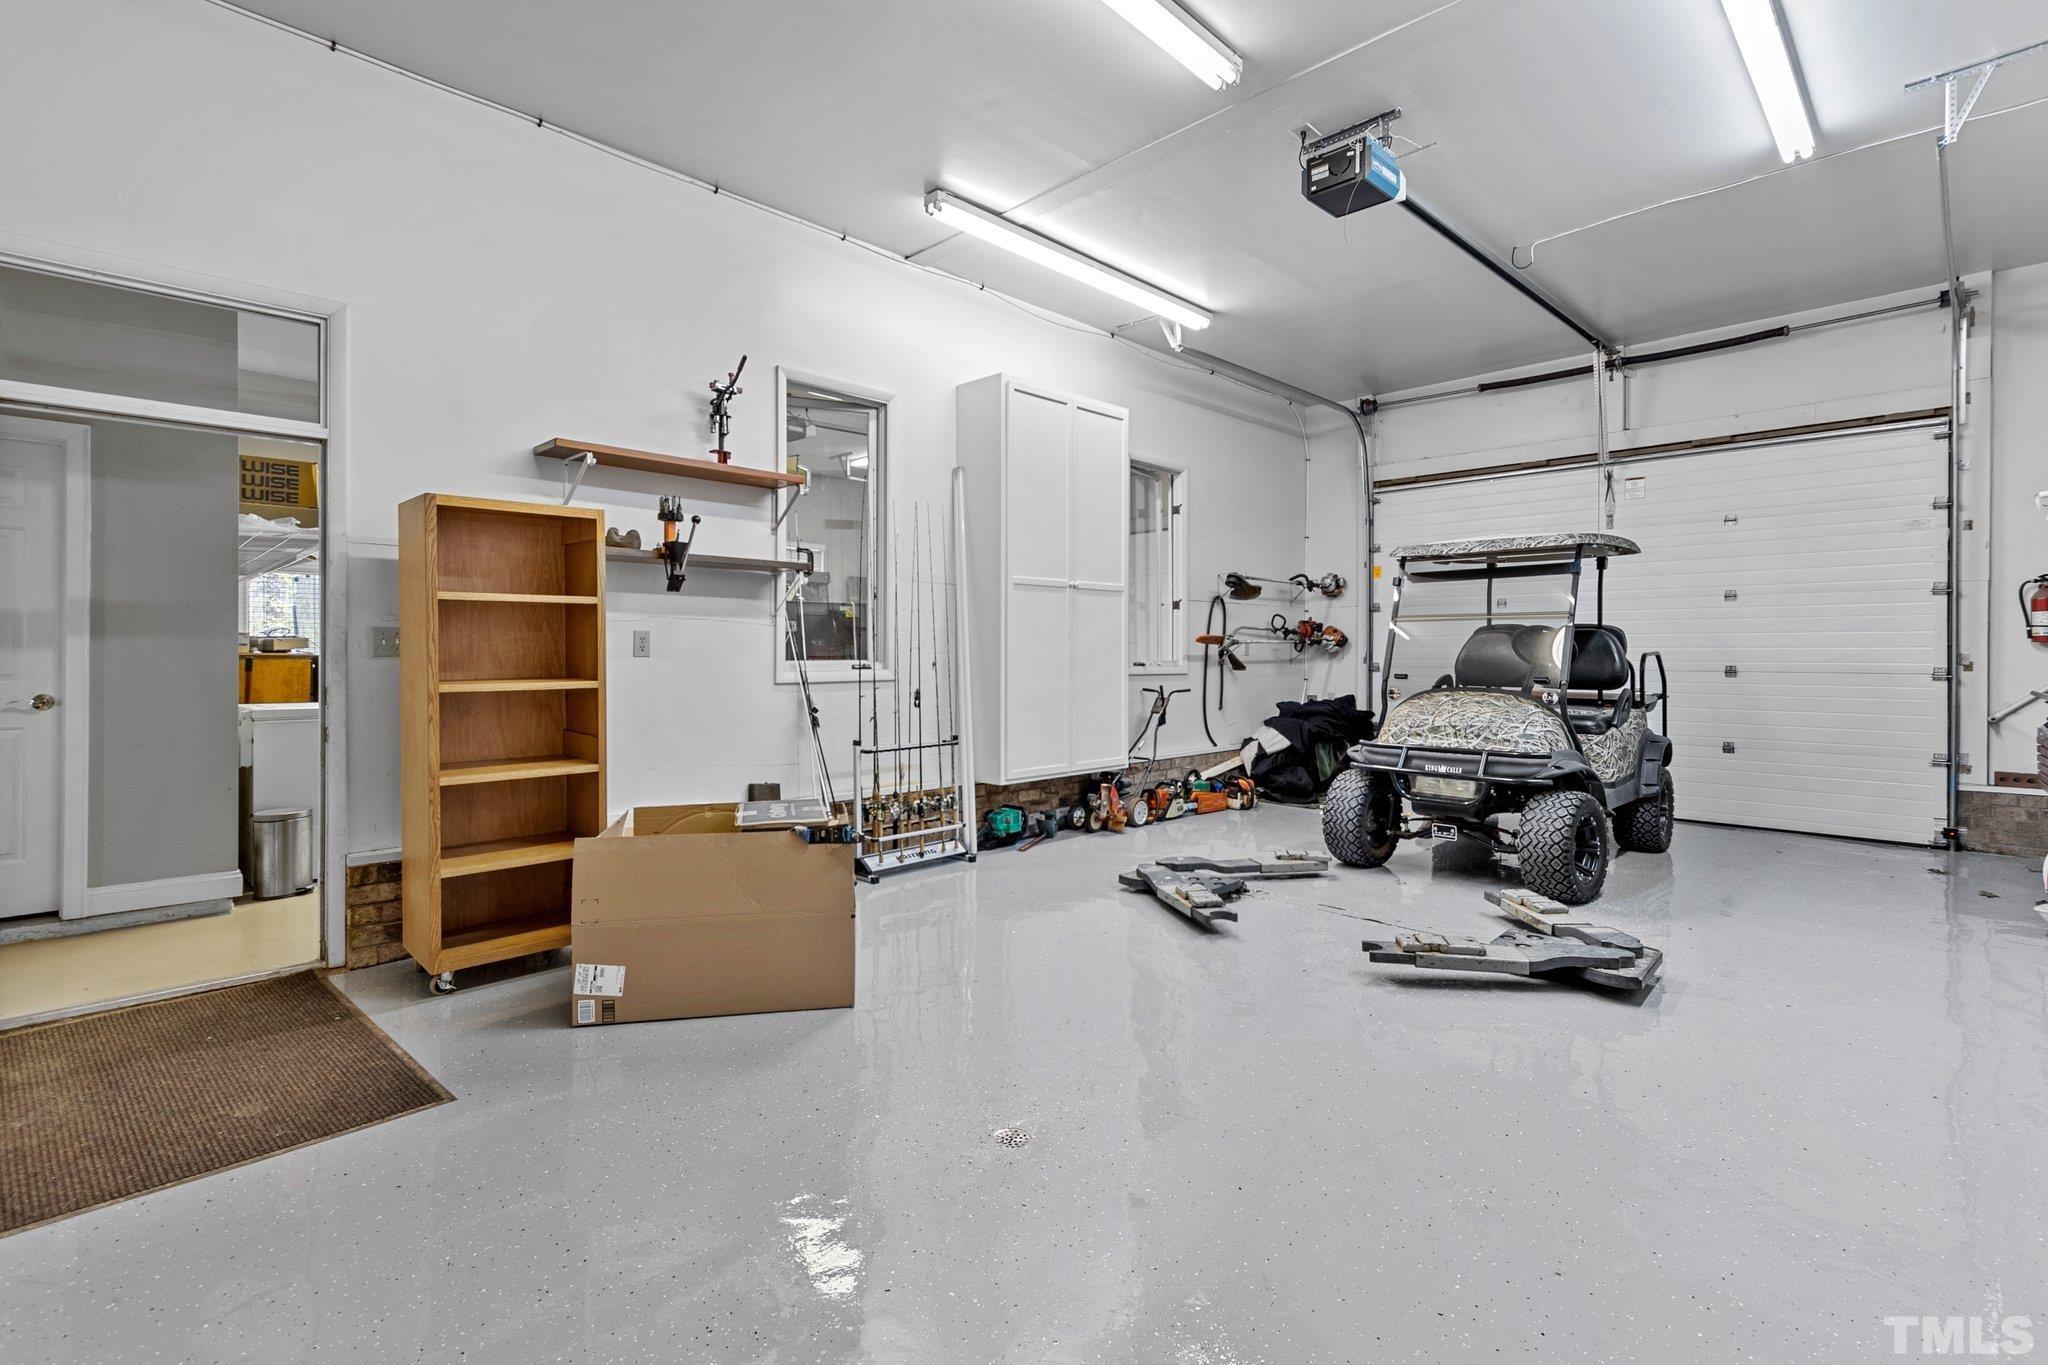 This garage bay has a lift and an air compressor. Tons of storage and cabinets.